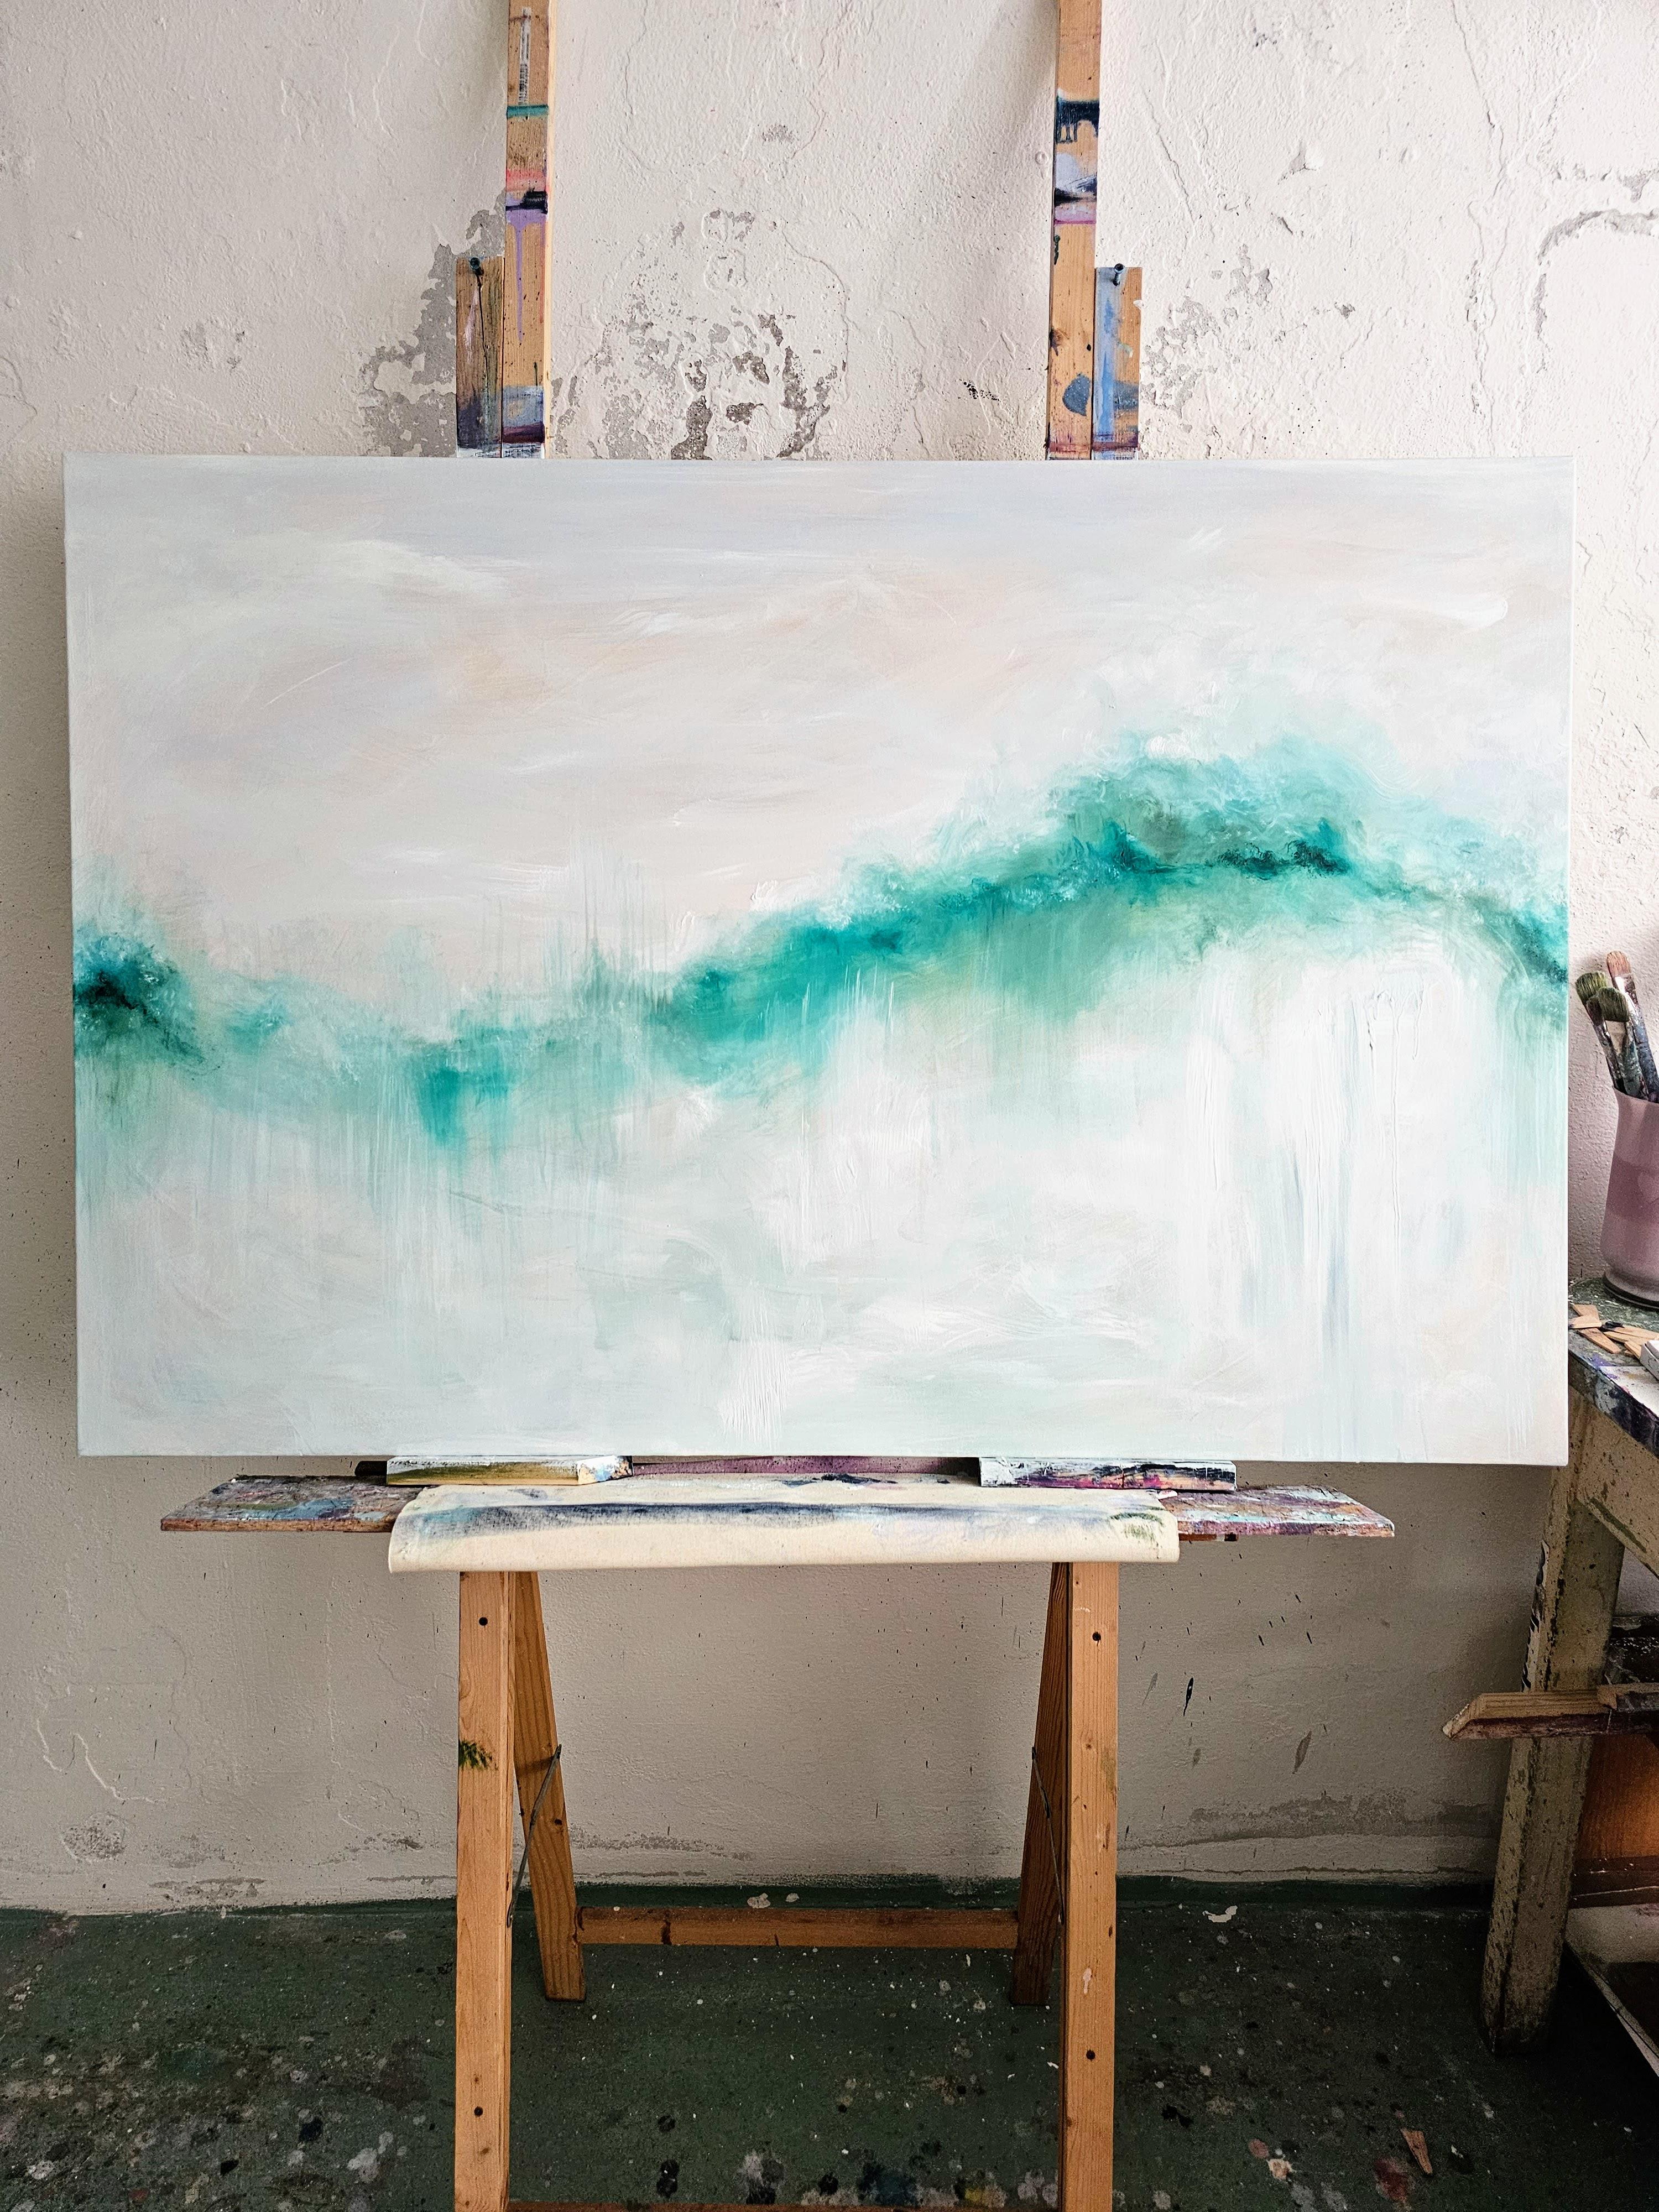 I dreamt of the sea - Large abstract seascape painting - Painting by Jennifer L. Baker